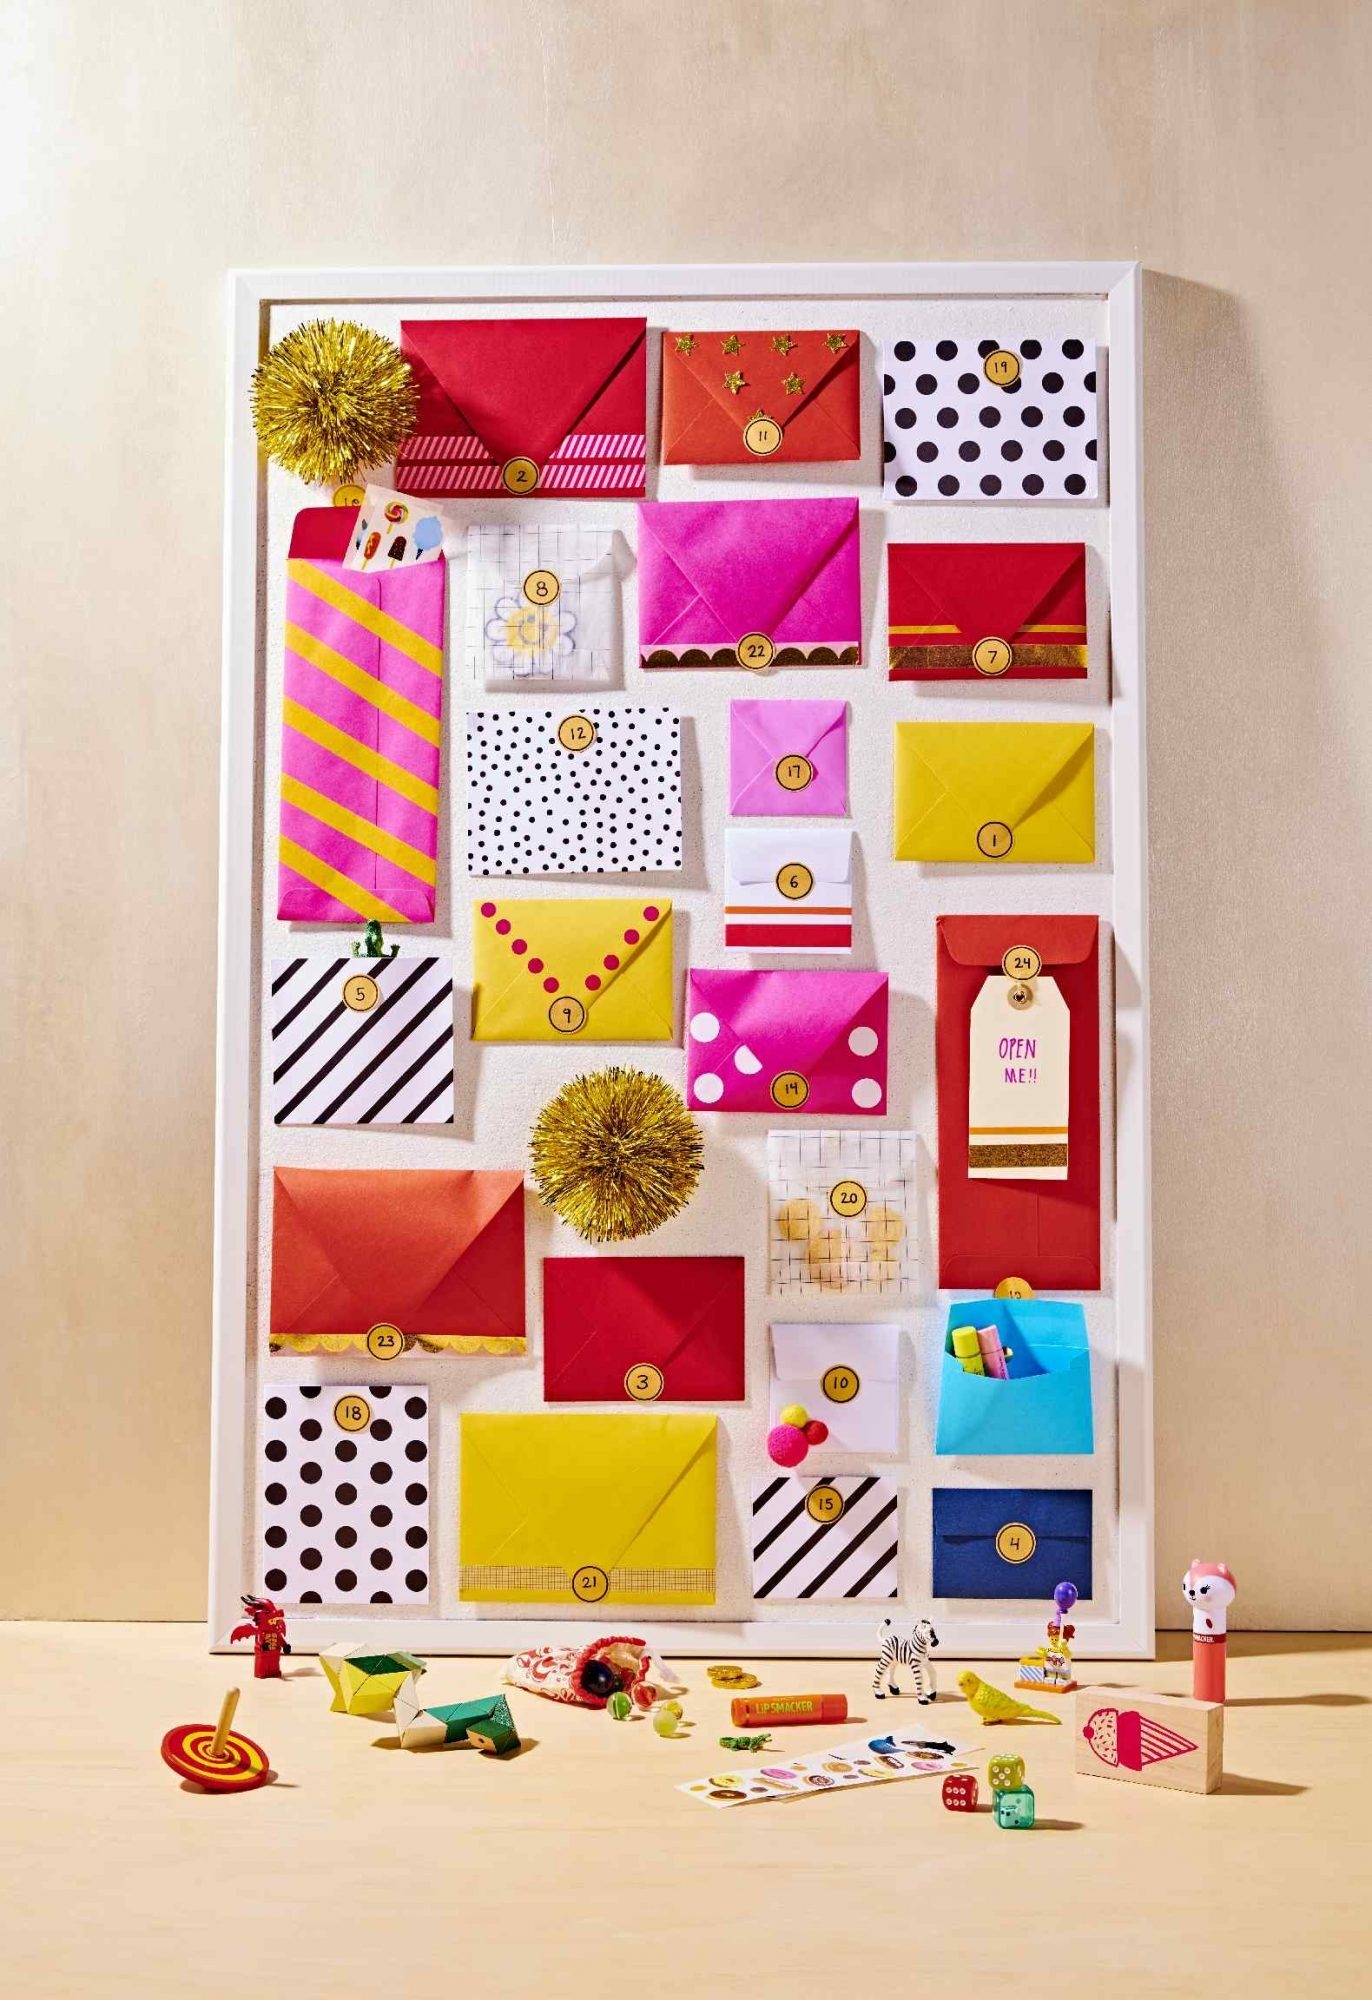 Make Your Own Advent Calendar To Countdown The Days 'til